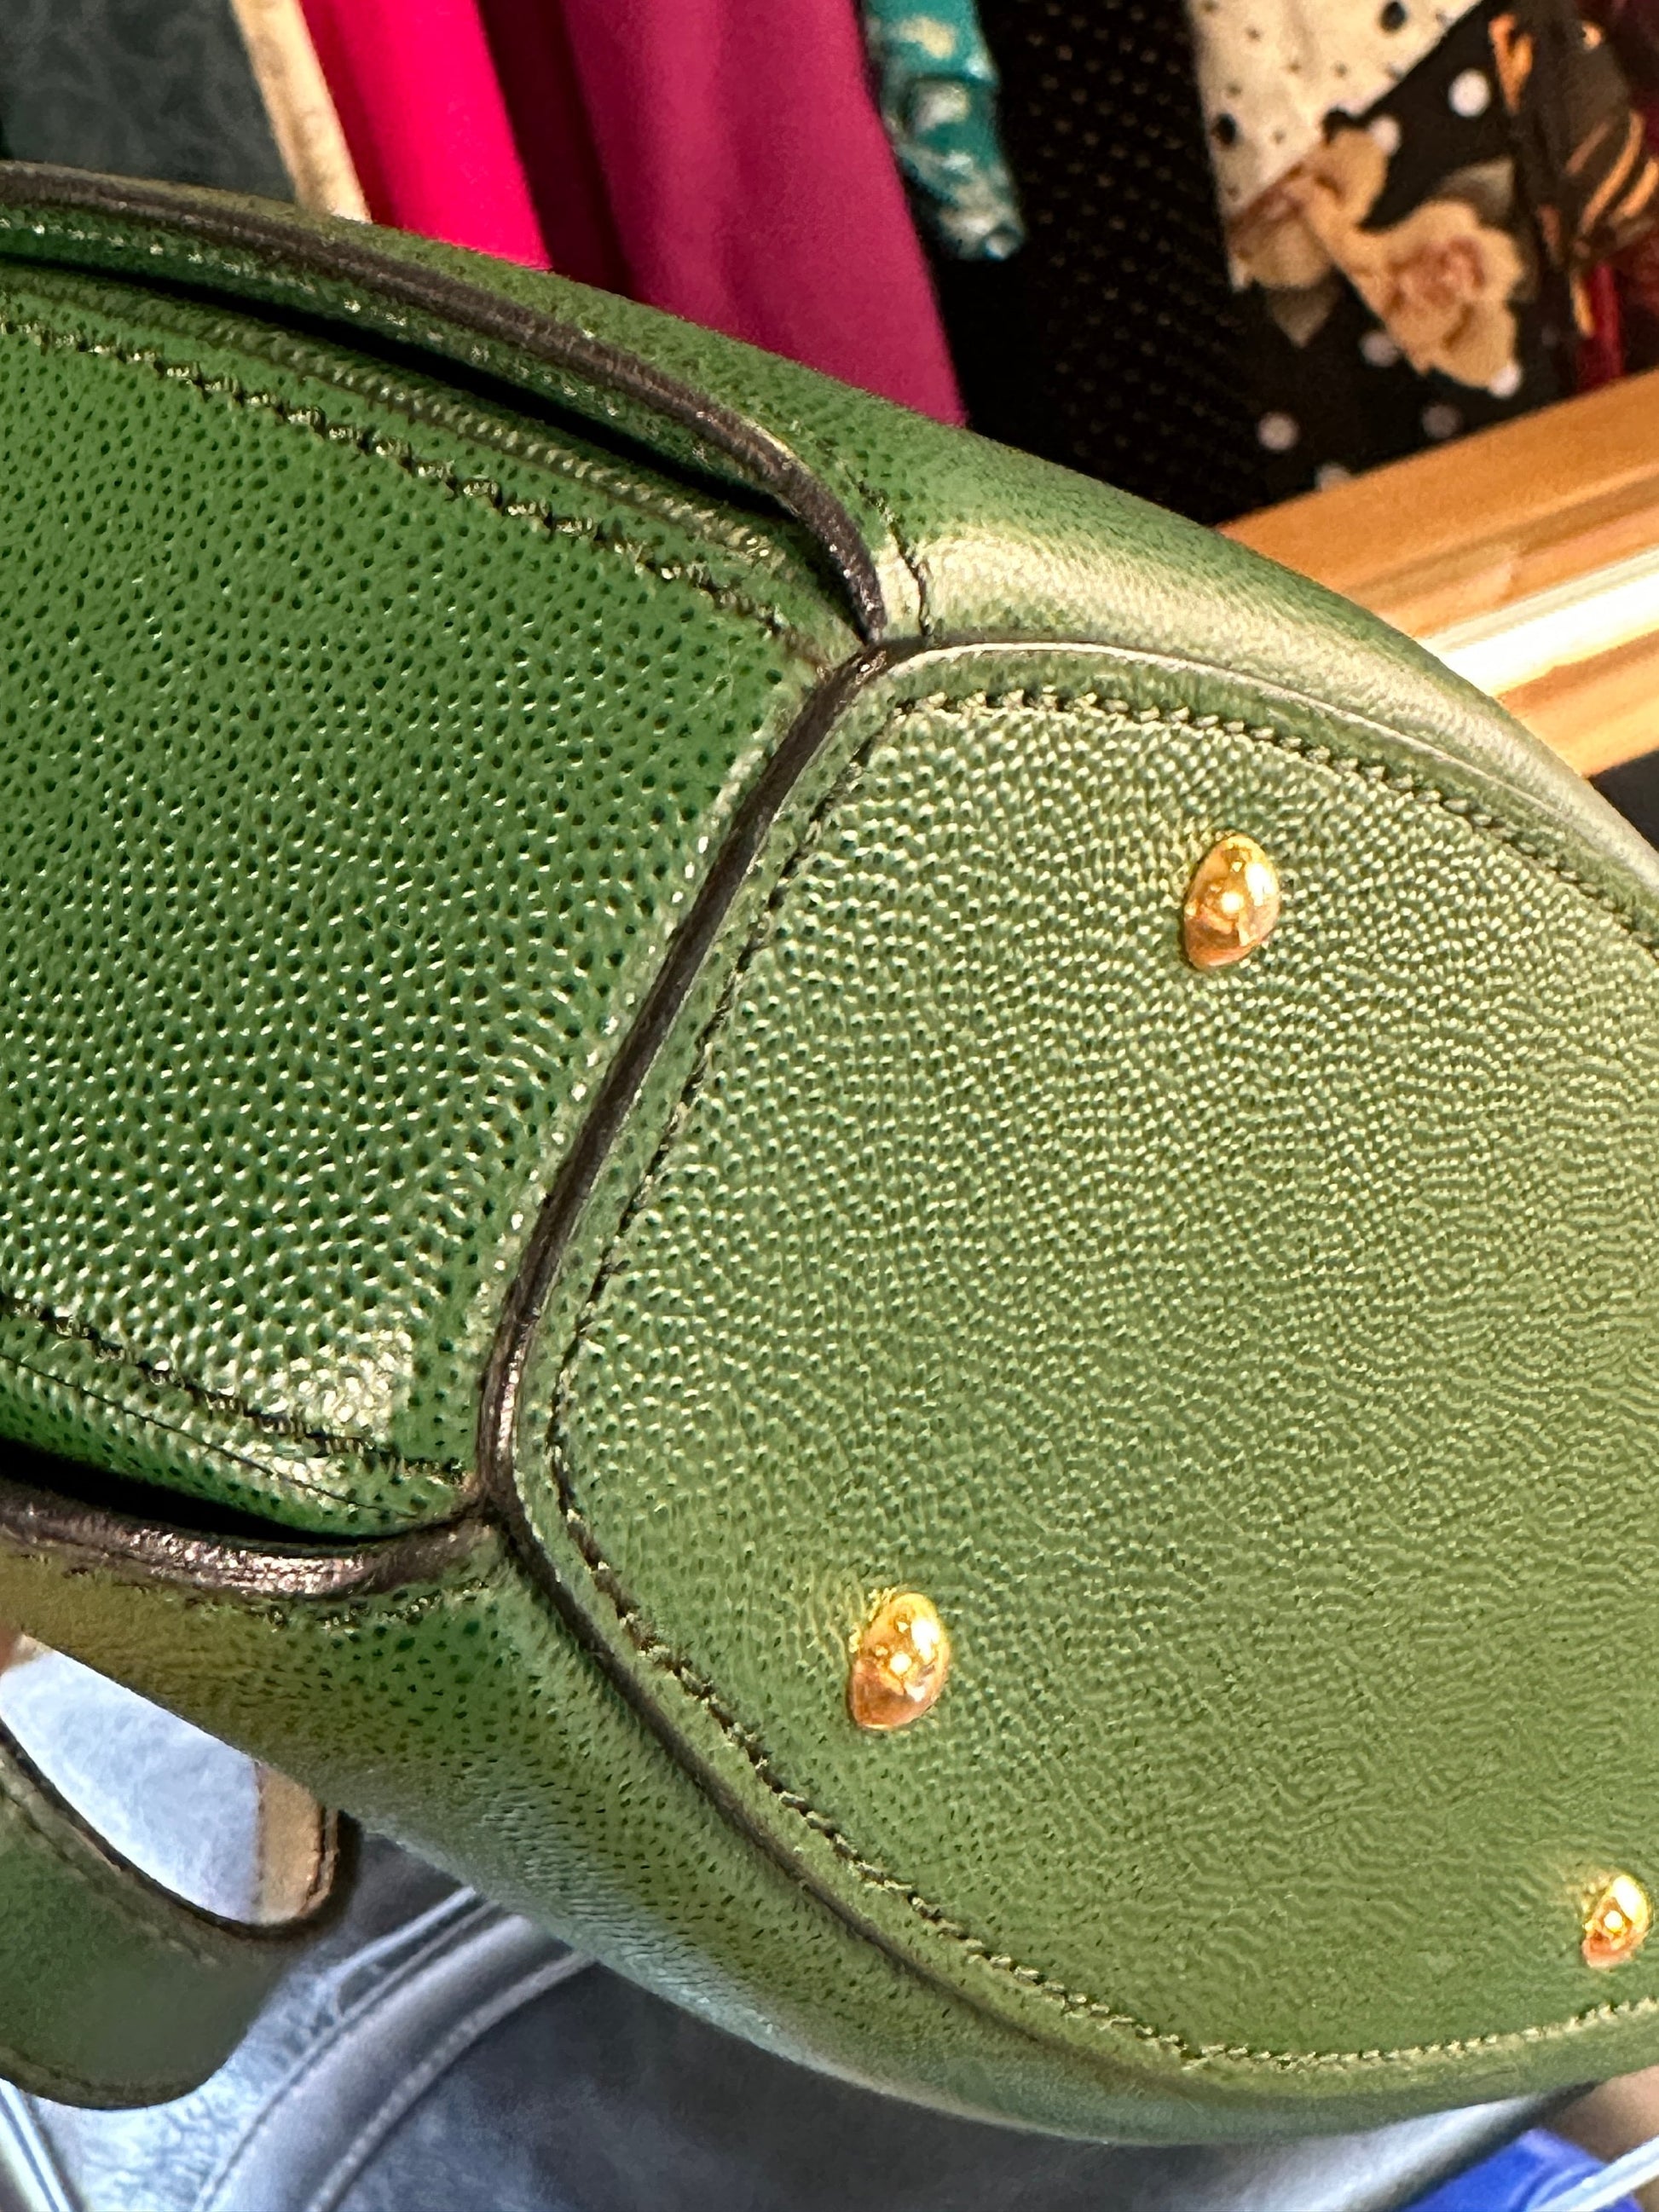 CELINE VINTAGE 100% Authentic Genuine, Leather Double Strap Shoulder Bag, Green, late 90's, Great Condition